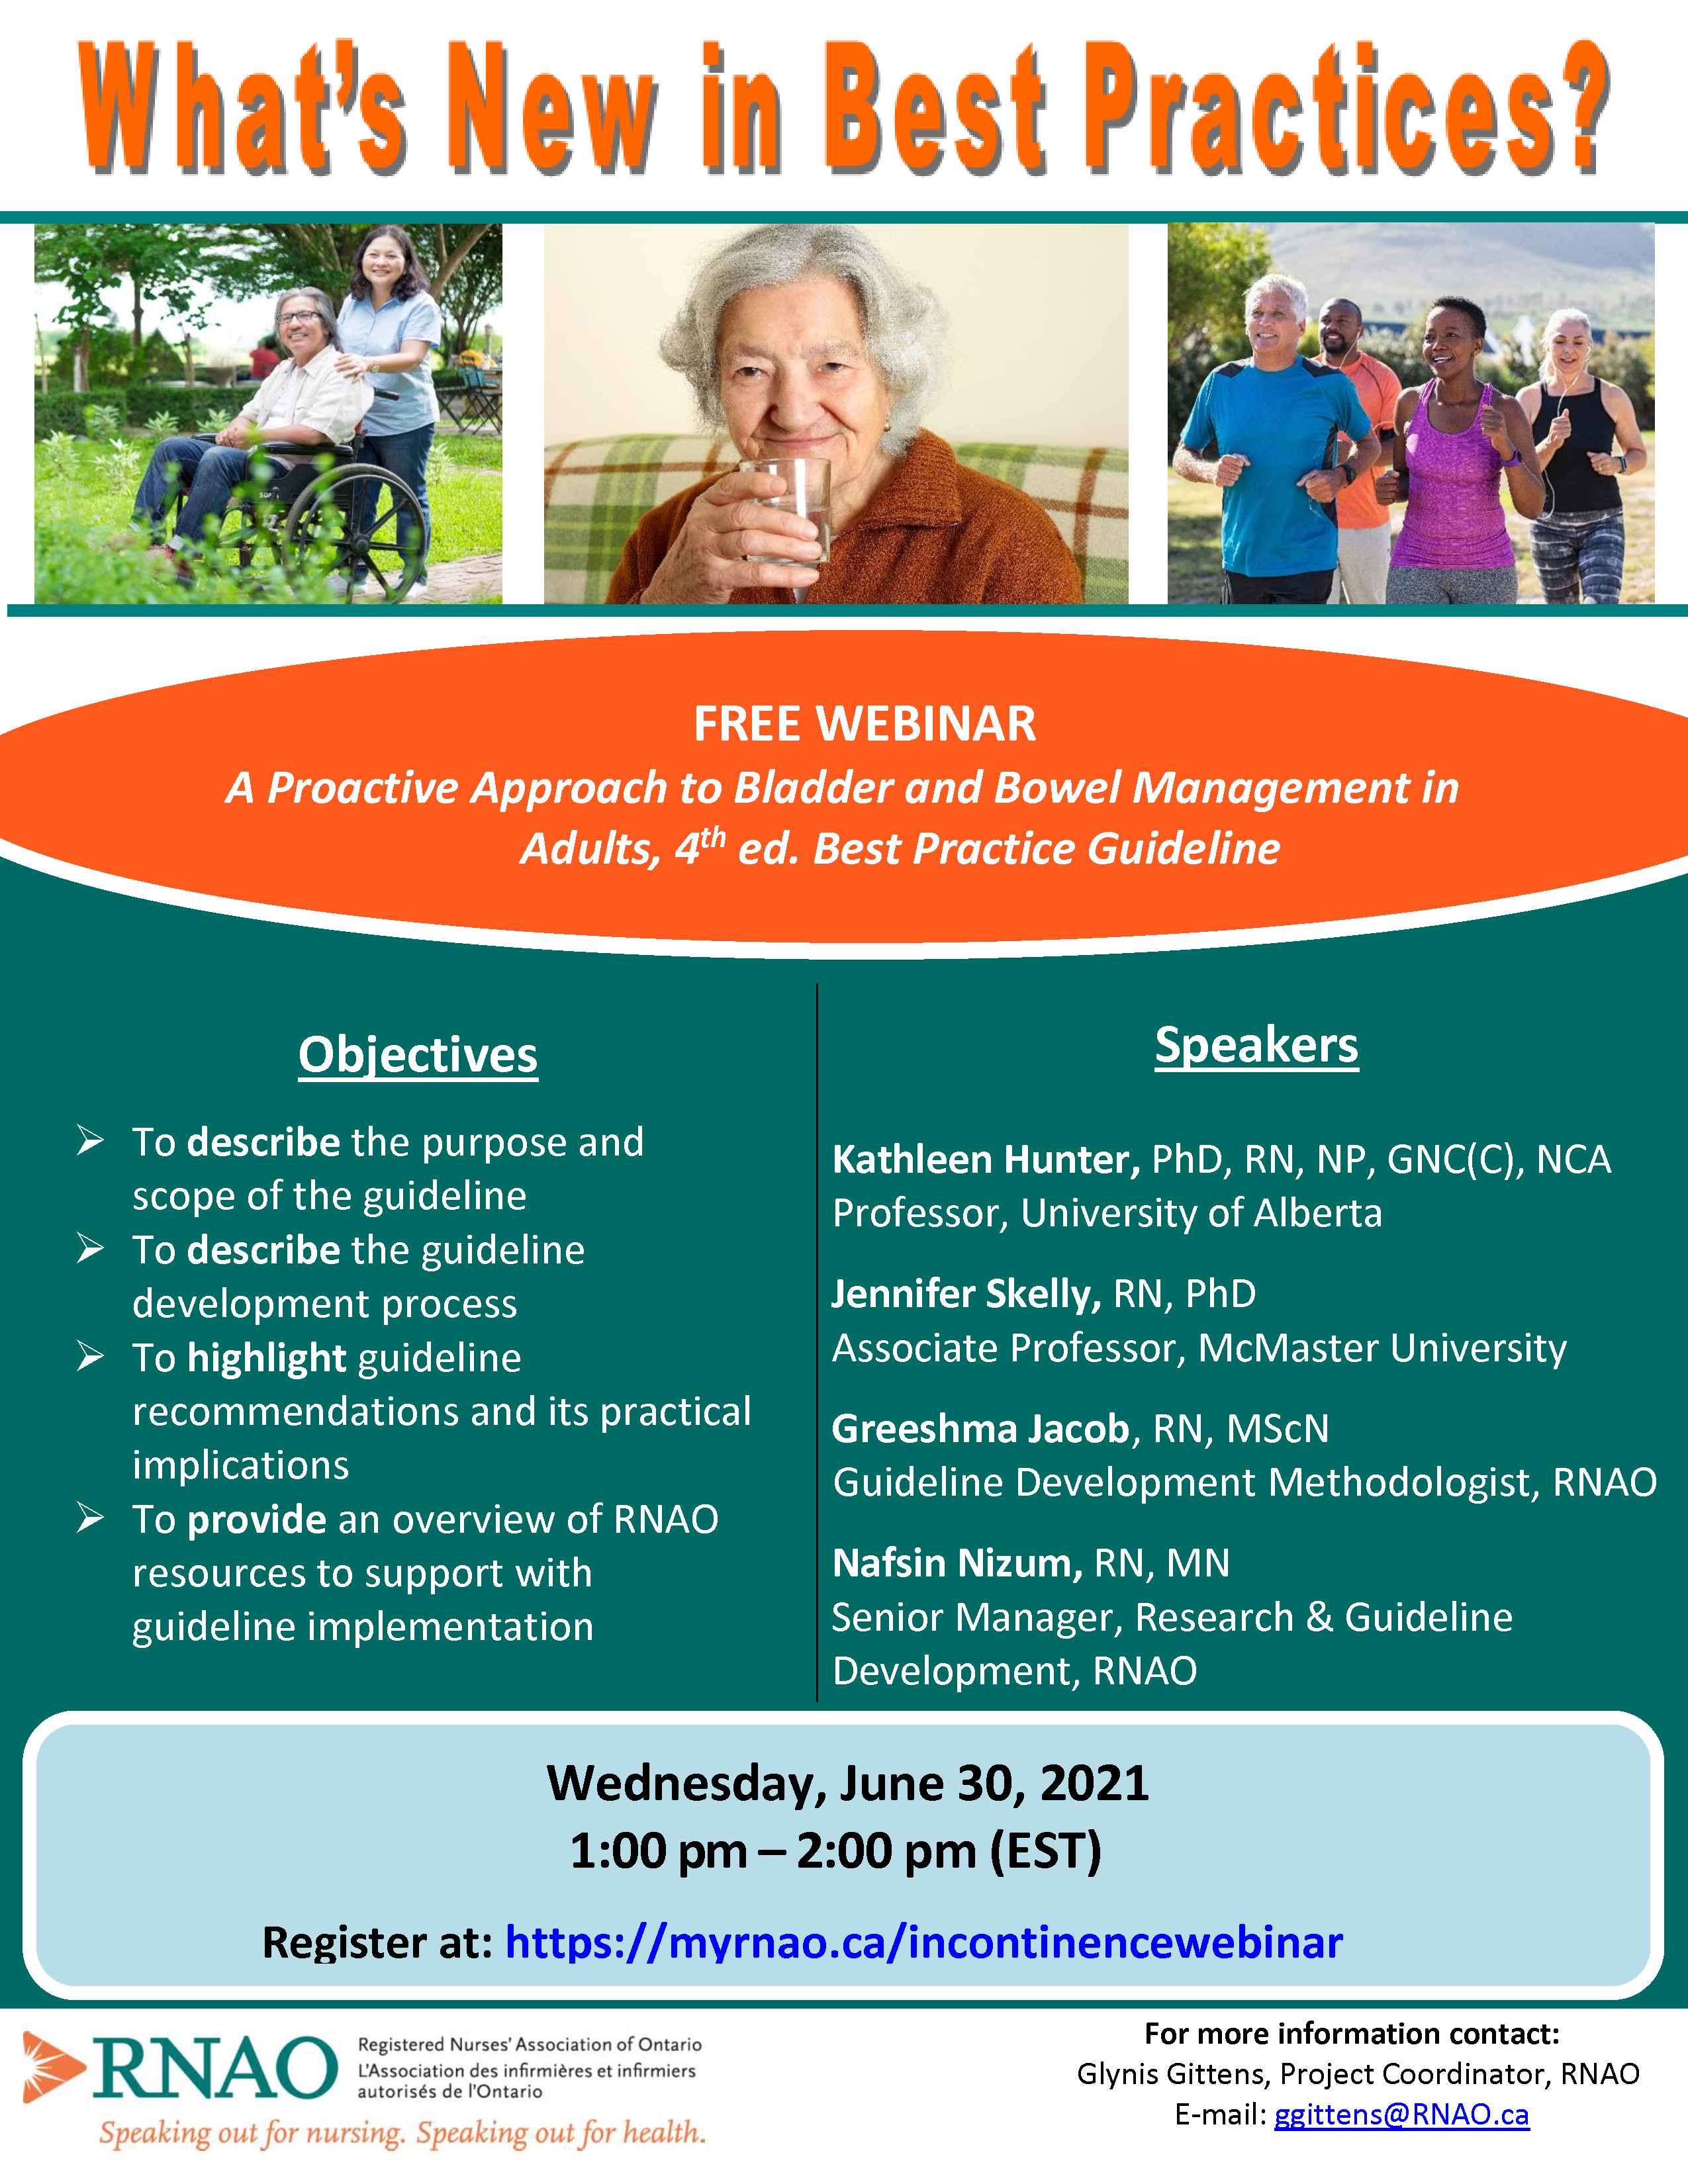 University of Alberta is hosting an Incontinence Webinar on June 30th, 2021. Follow the link to register and for more information.